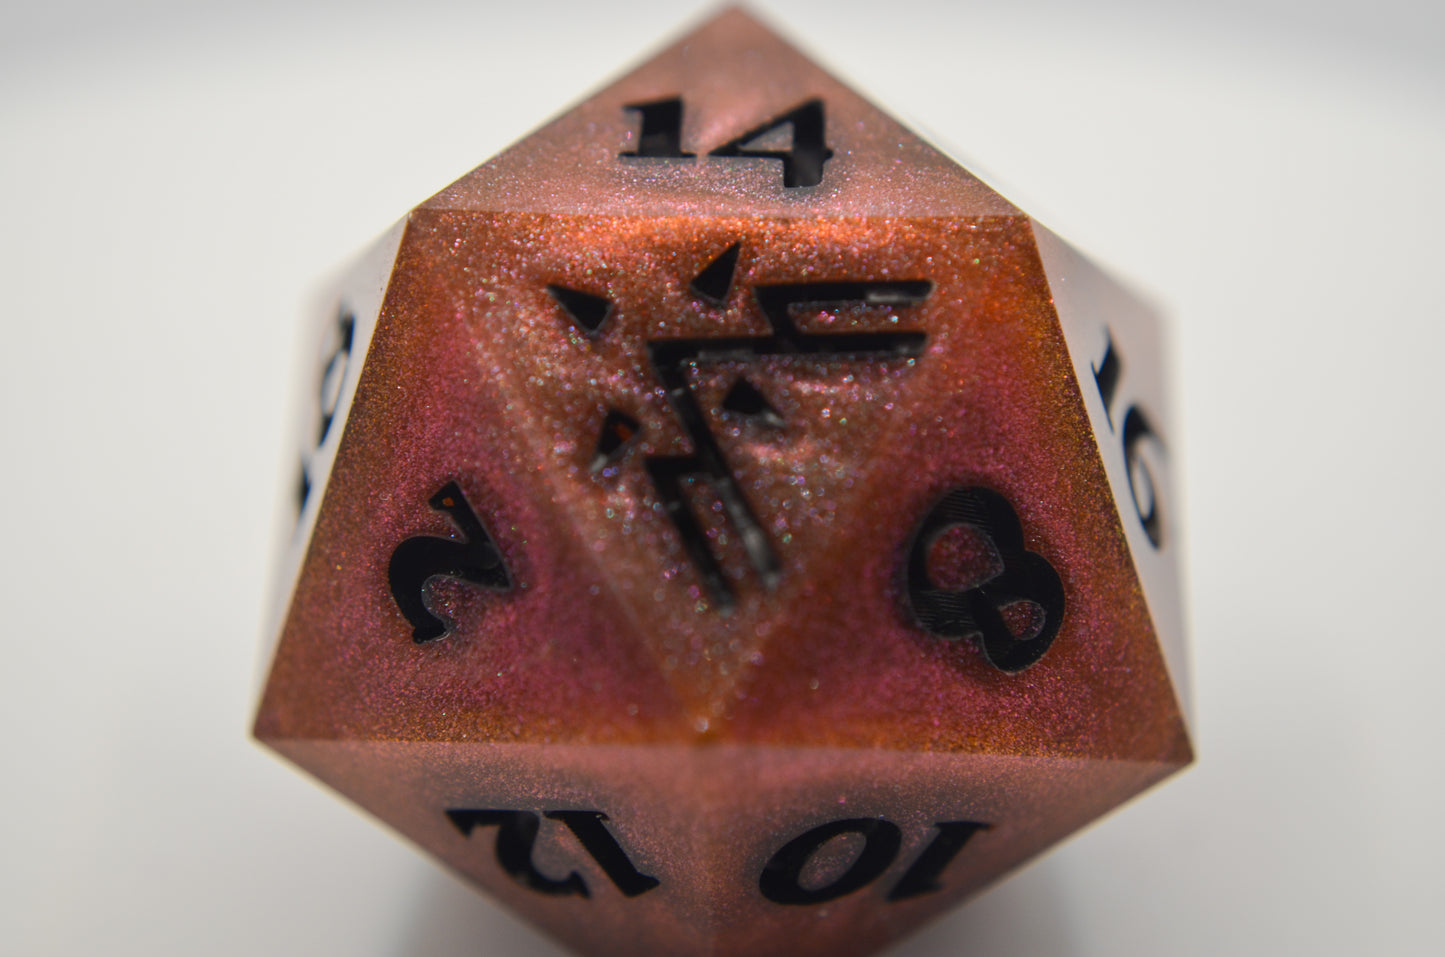 Pink/Green Color Shift 30 mm Giant D20